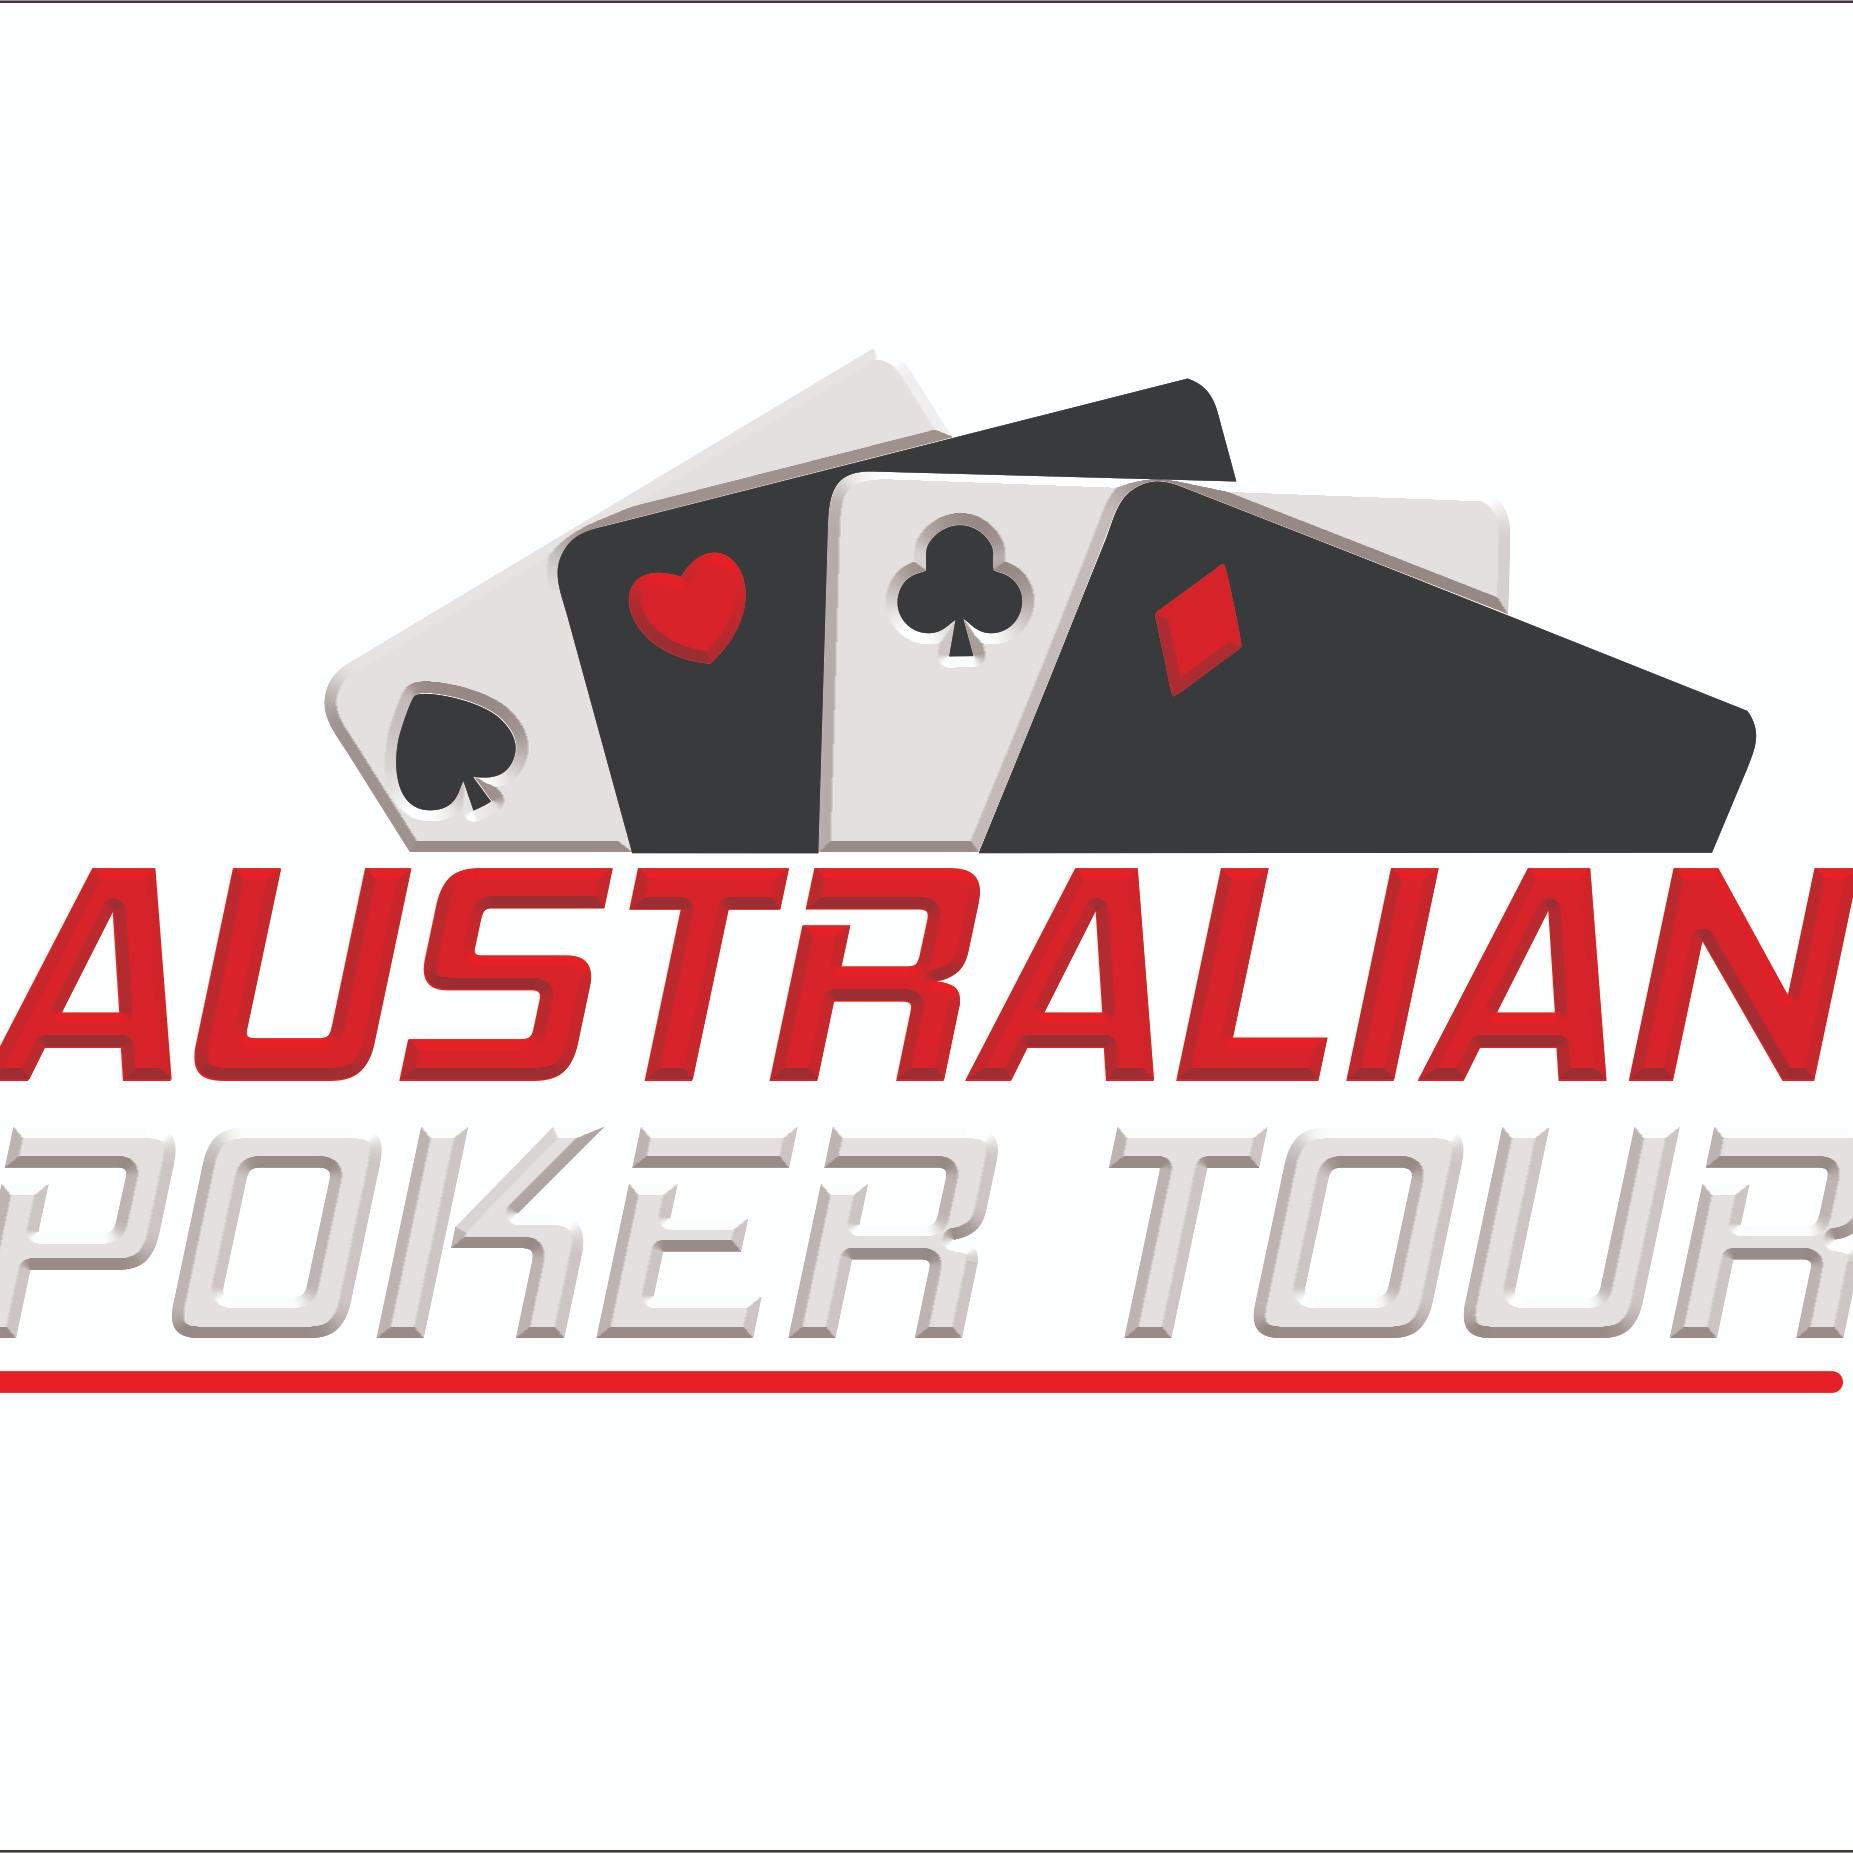 The APT is a series of major poker tournaments conducted and live streamed throughout Aus. APT events are held in some of the largest pubs and clubs in Aus.